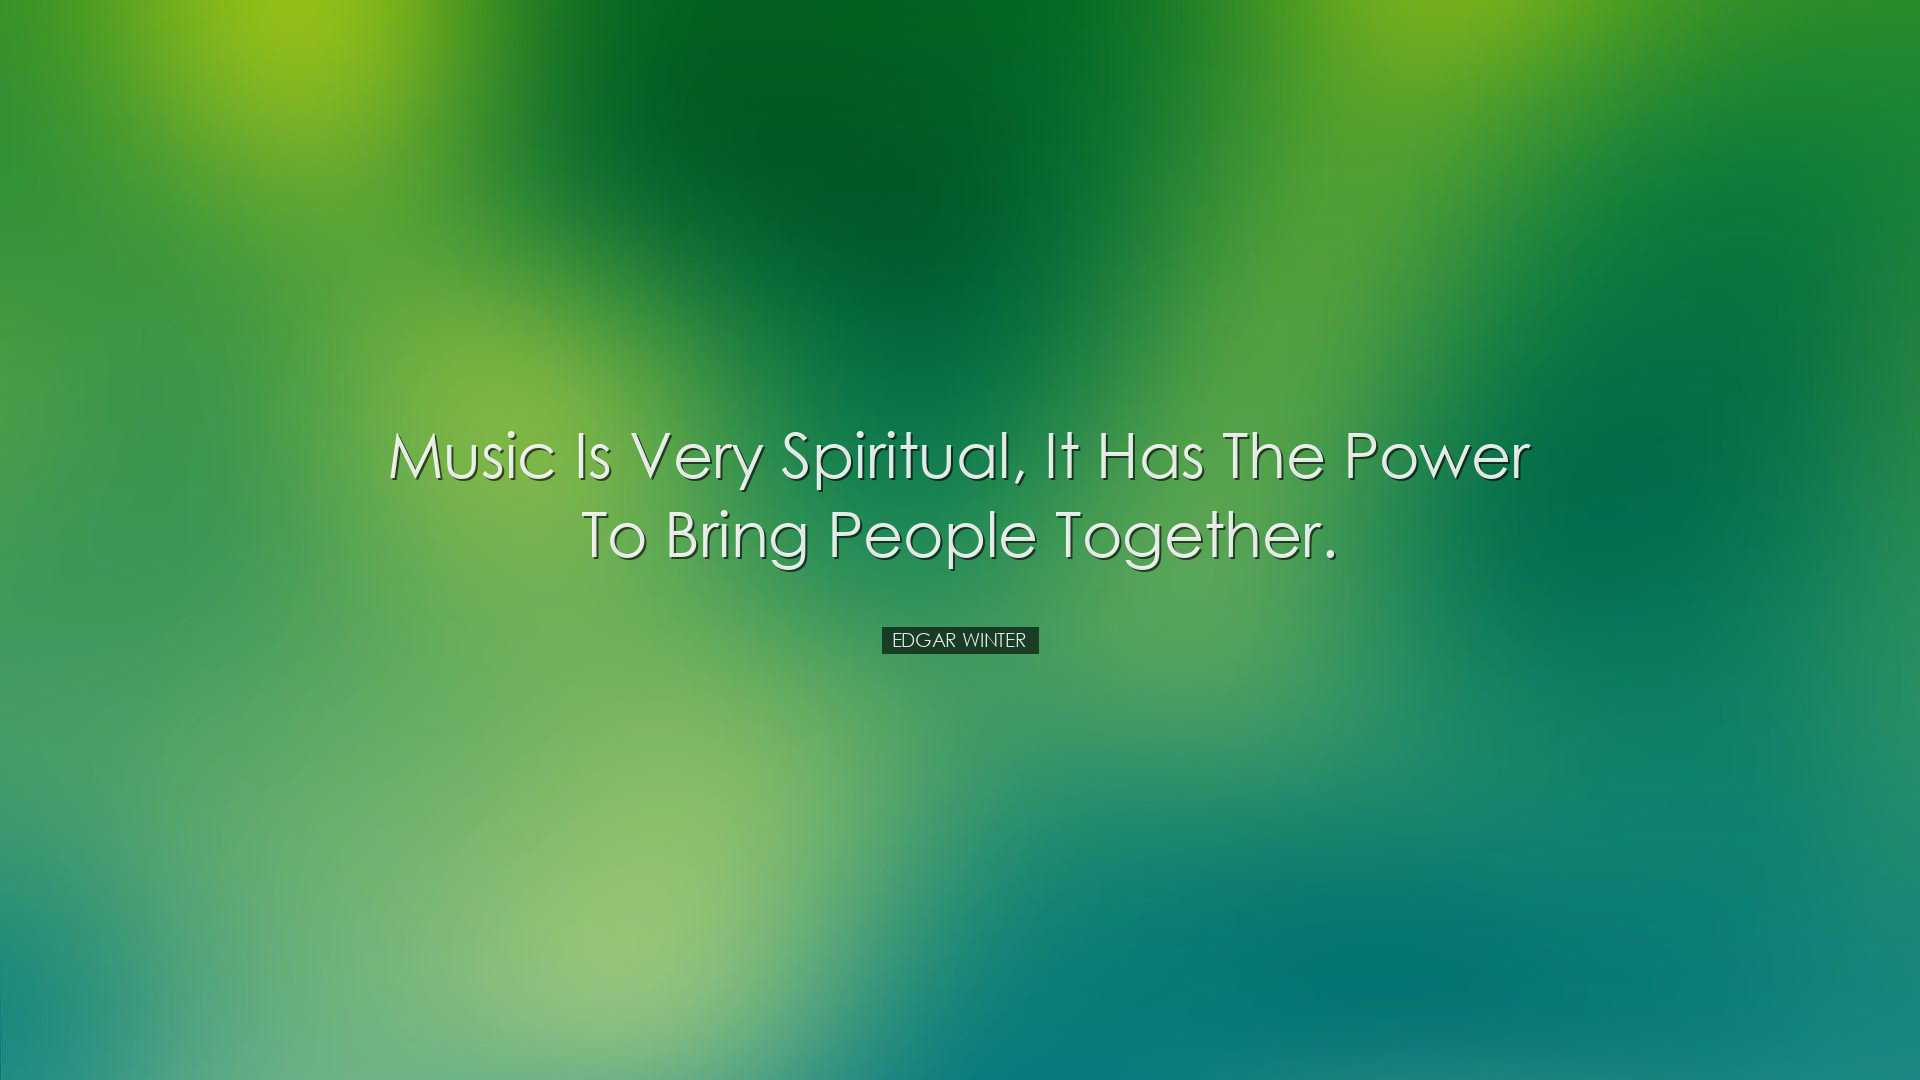 Music is very spiritual, it has the power to bring people together